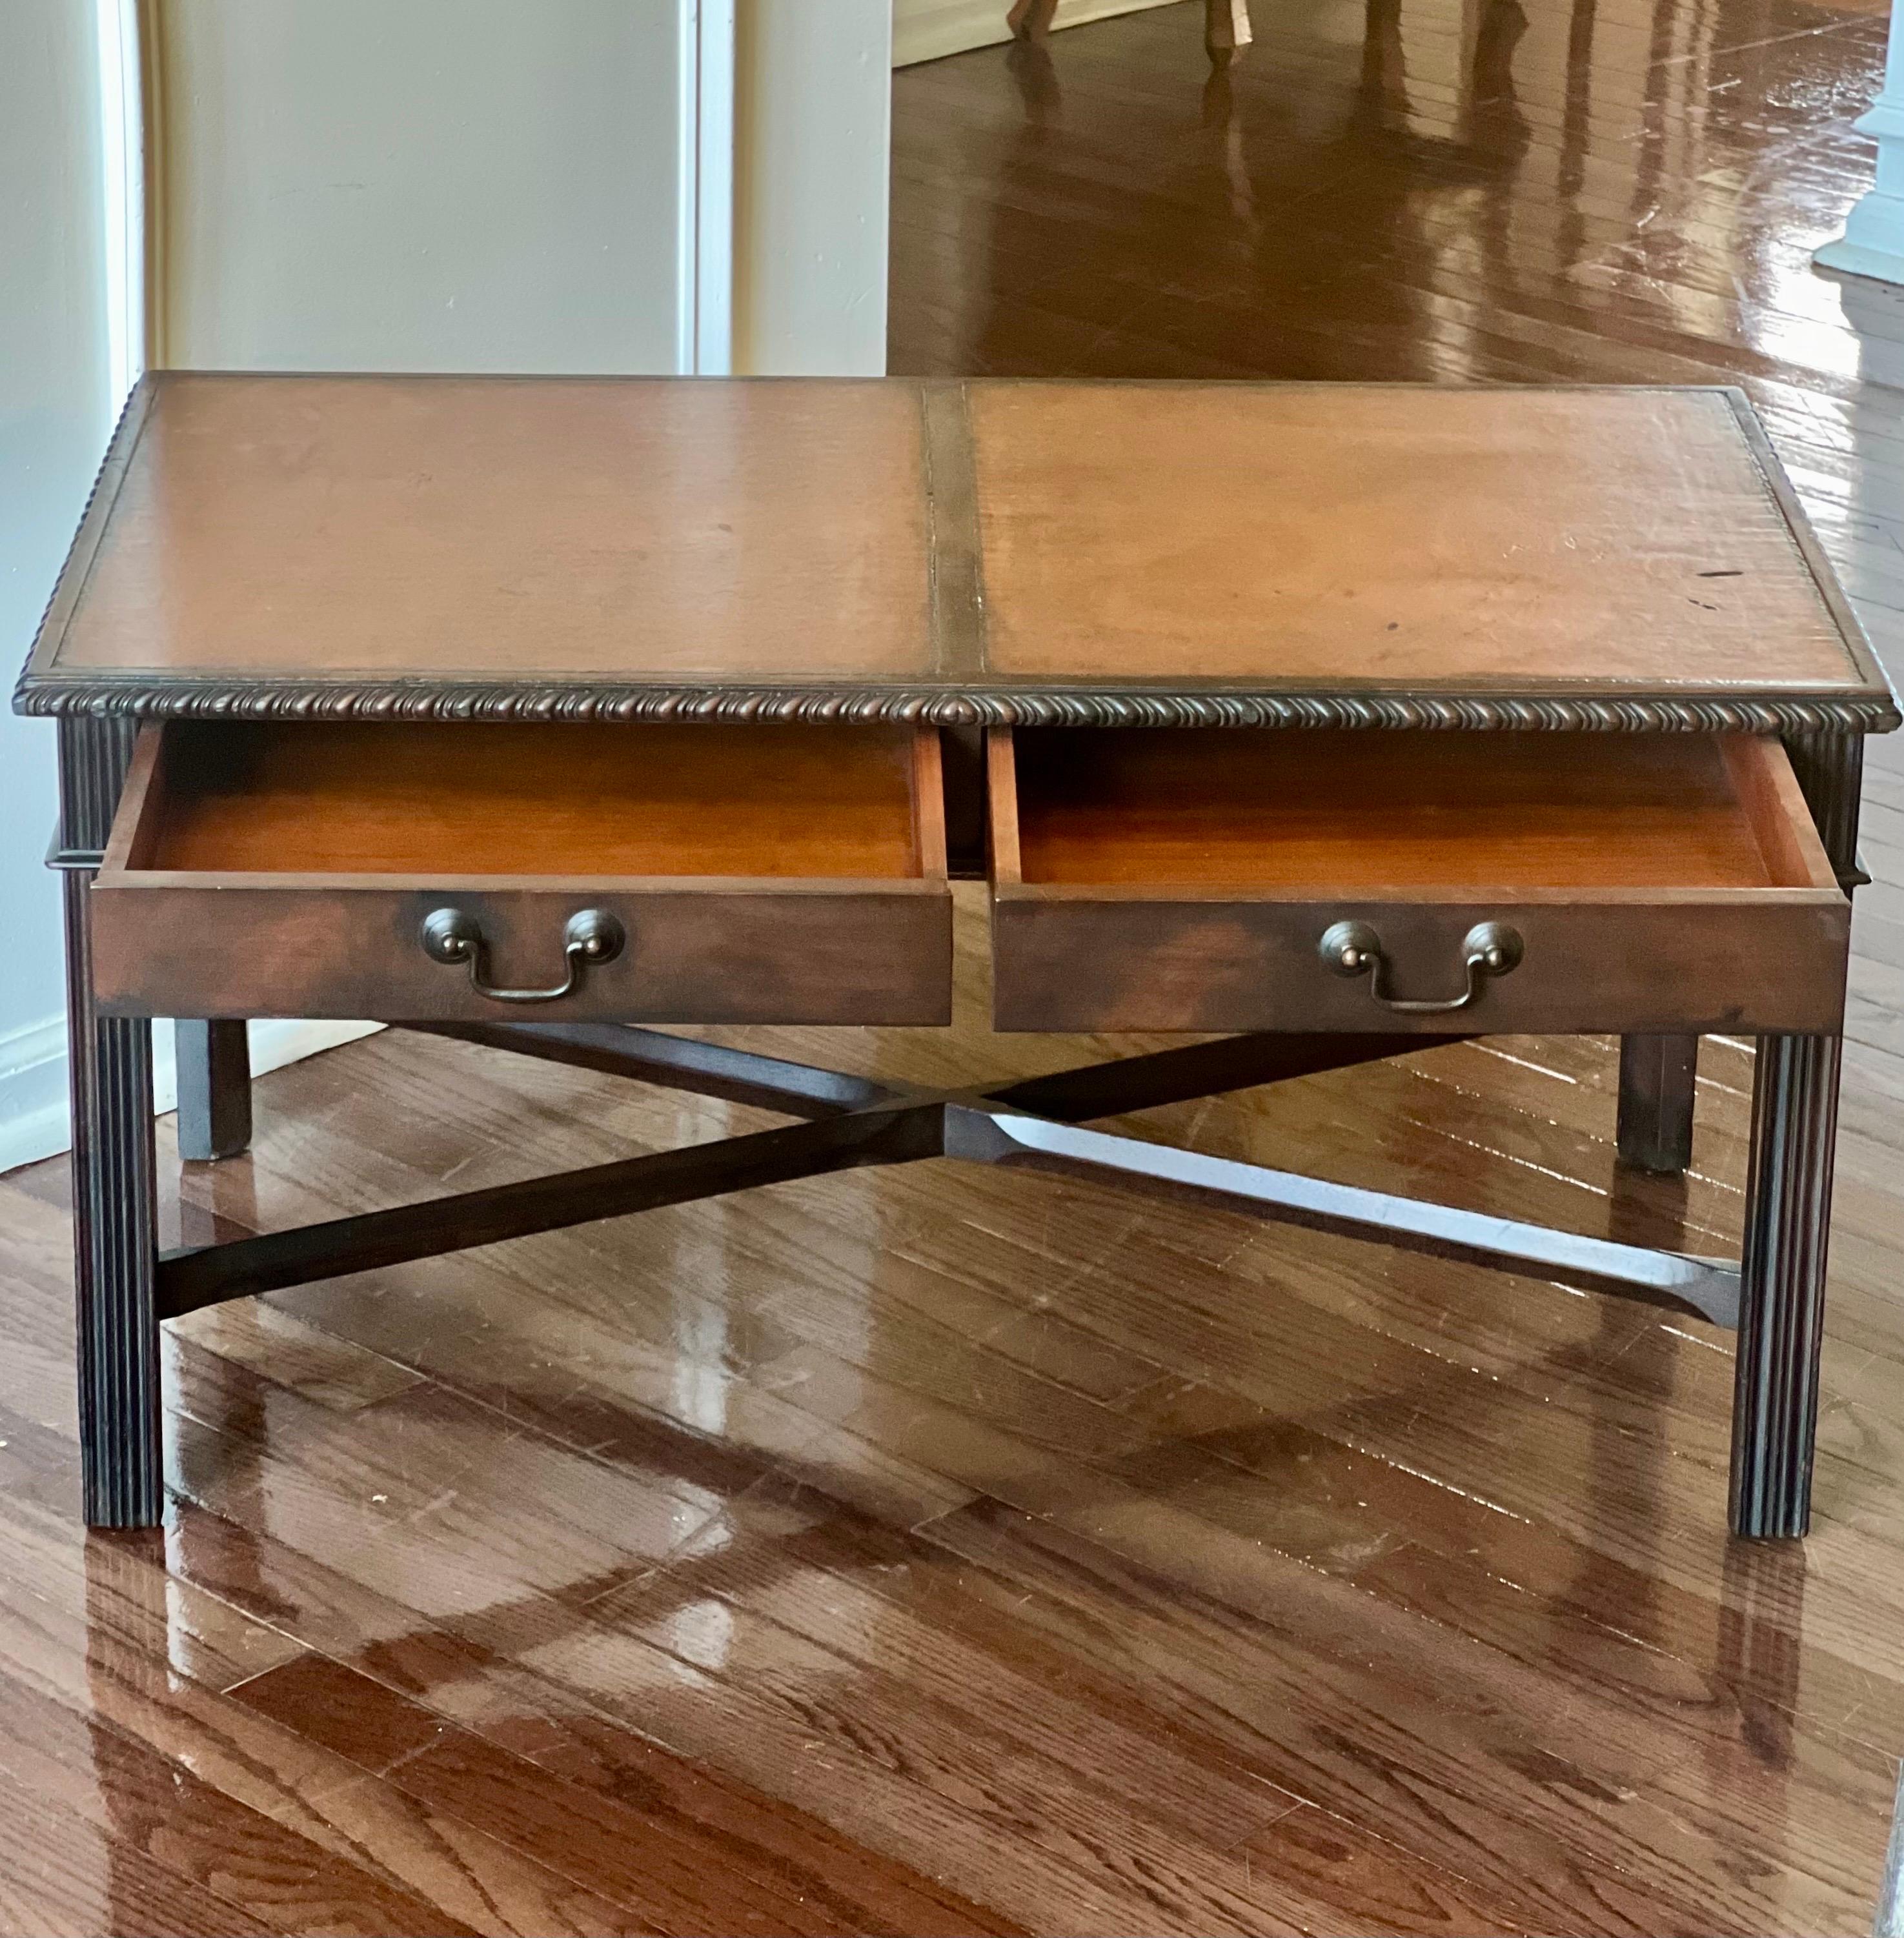 Mahogany Chippendale Style Coffee Table with Leather Top and Drawers by Imperial For Sale 1